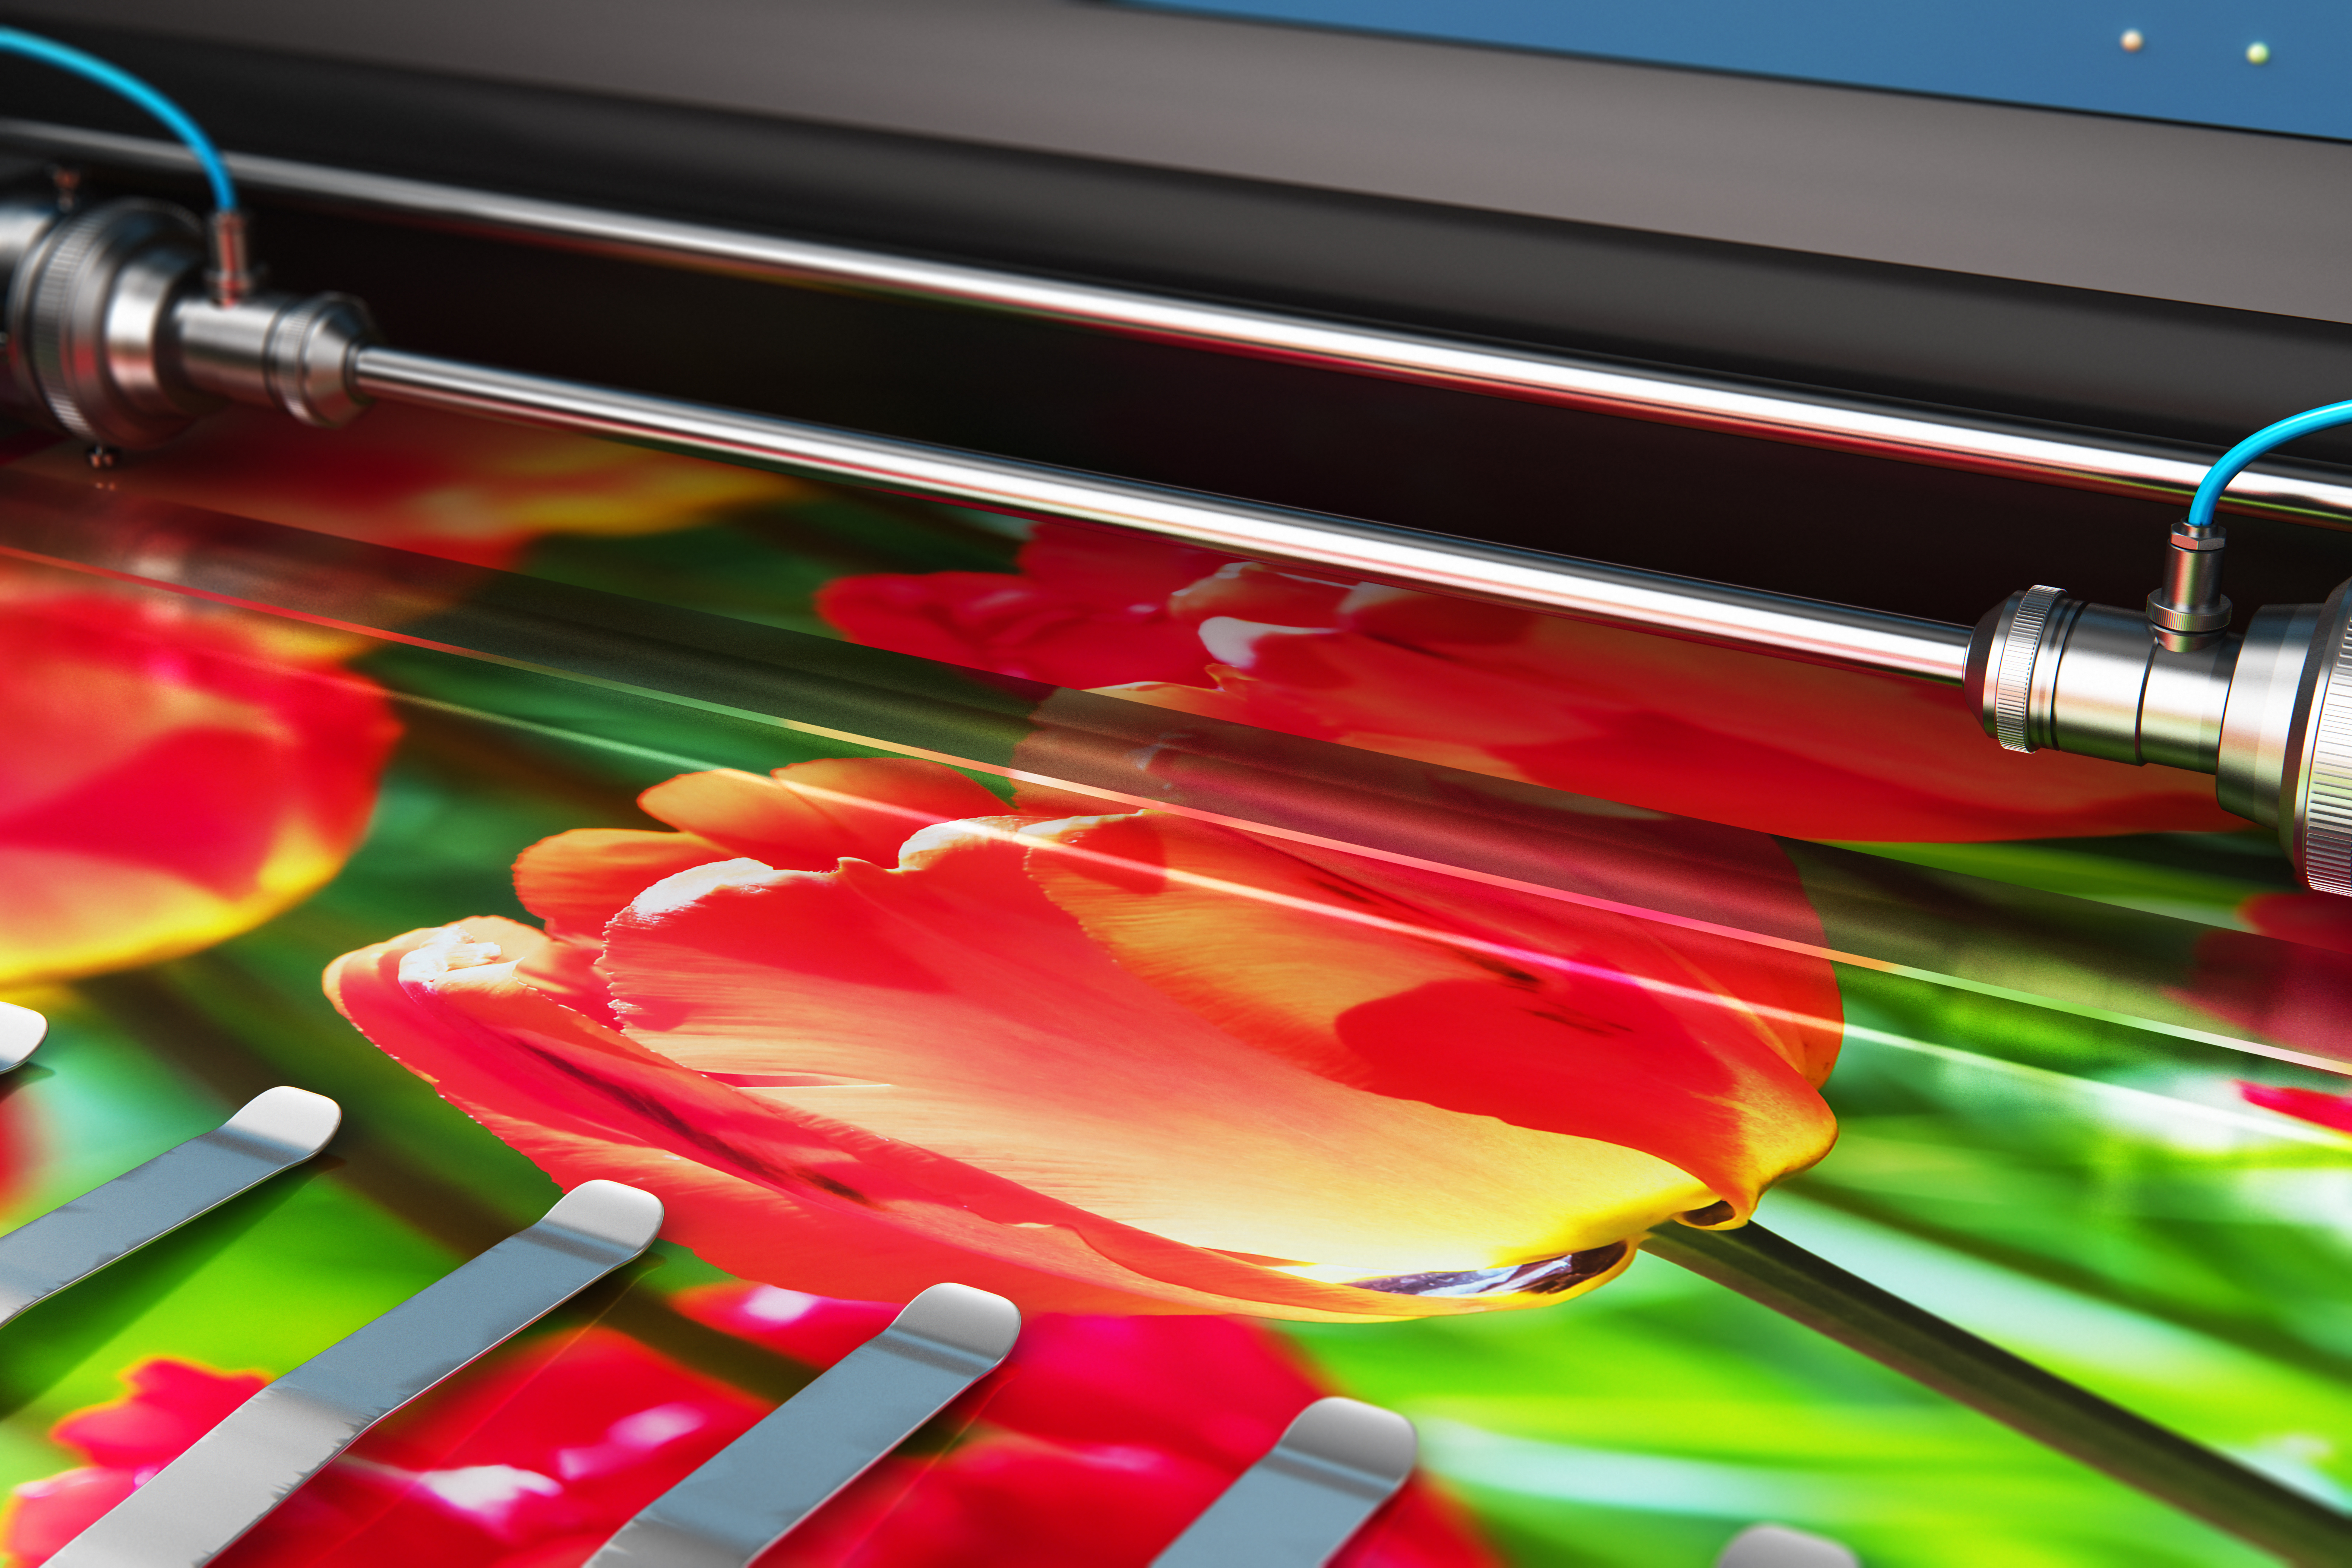 A photo of a printer producing a crisp image of red flowers.